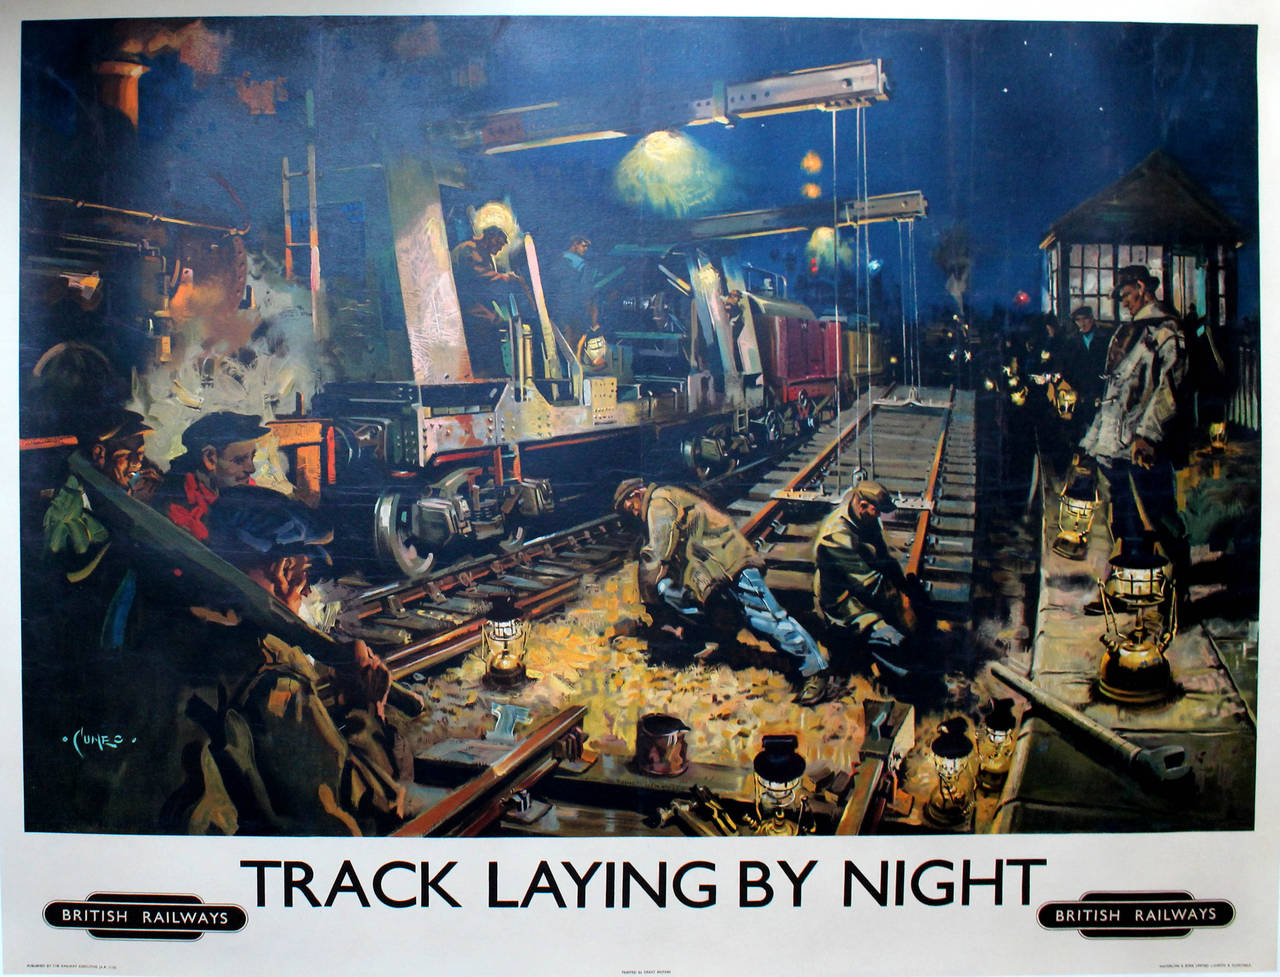 Original vintage British Railways poster - Track Laying By Night. Stunning industrial image featuring men working by overhead lights and lanterns, laying new railway tracks. Artwork by the notable British artist, Terence Cuneo (1907-1996), who was